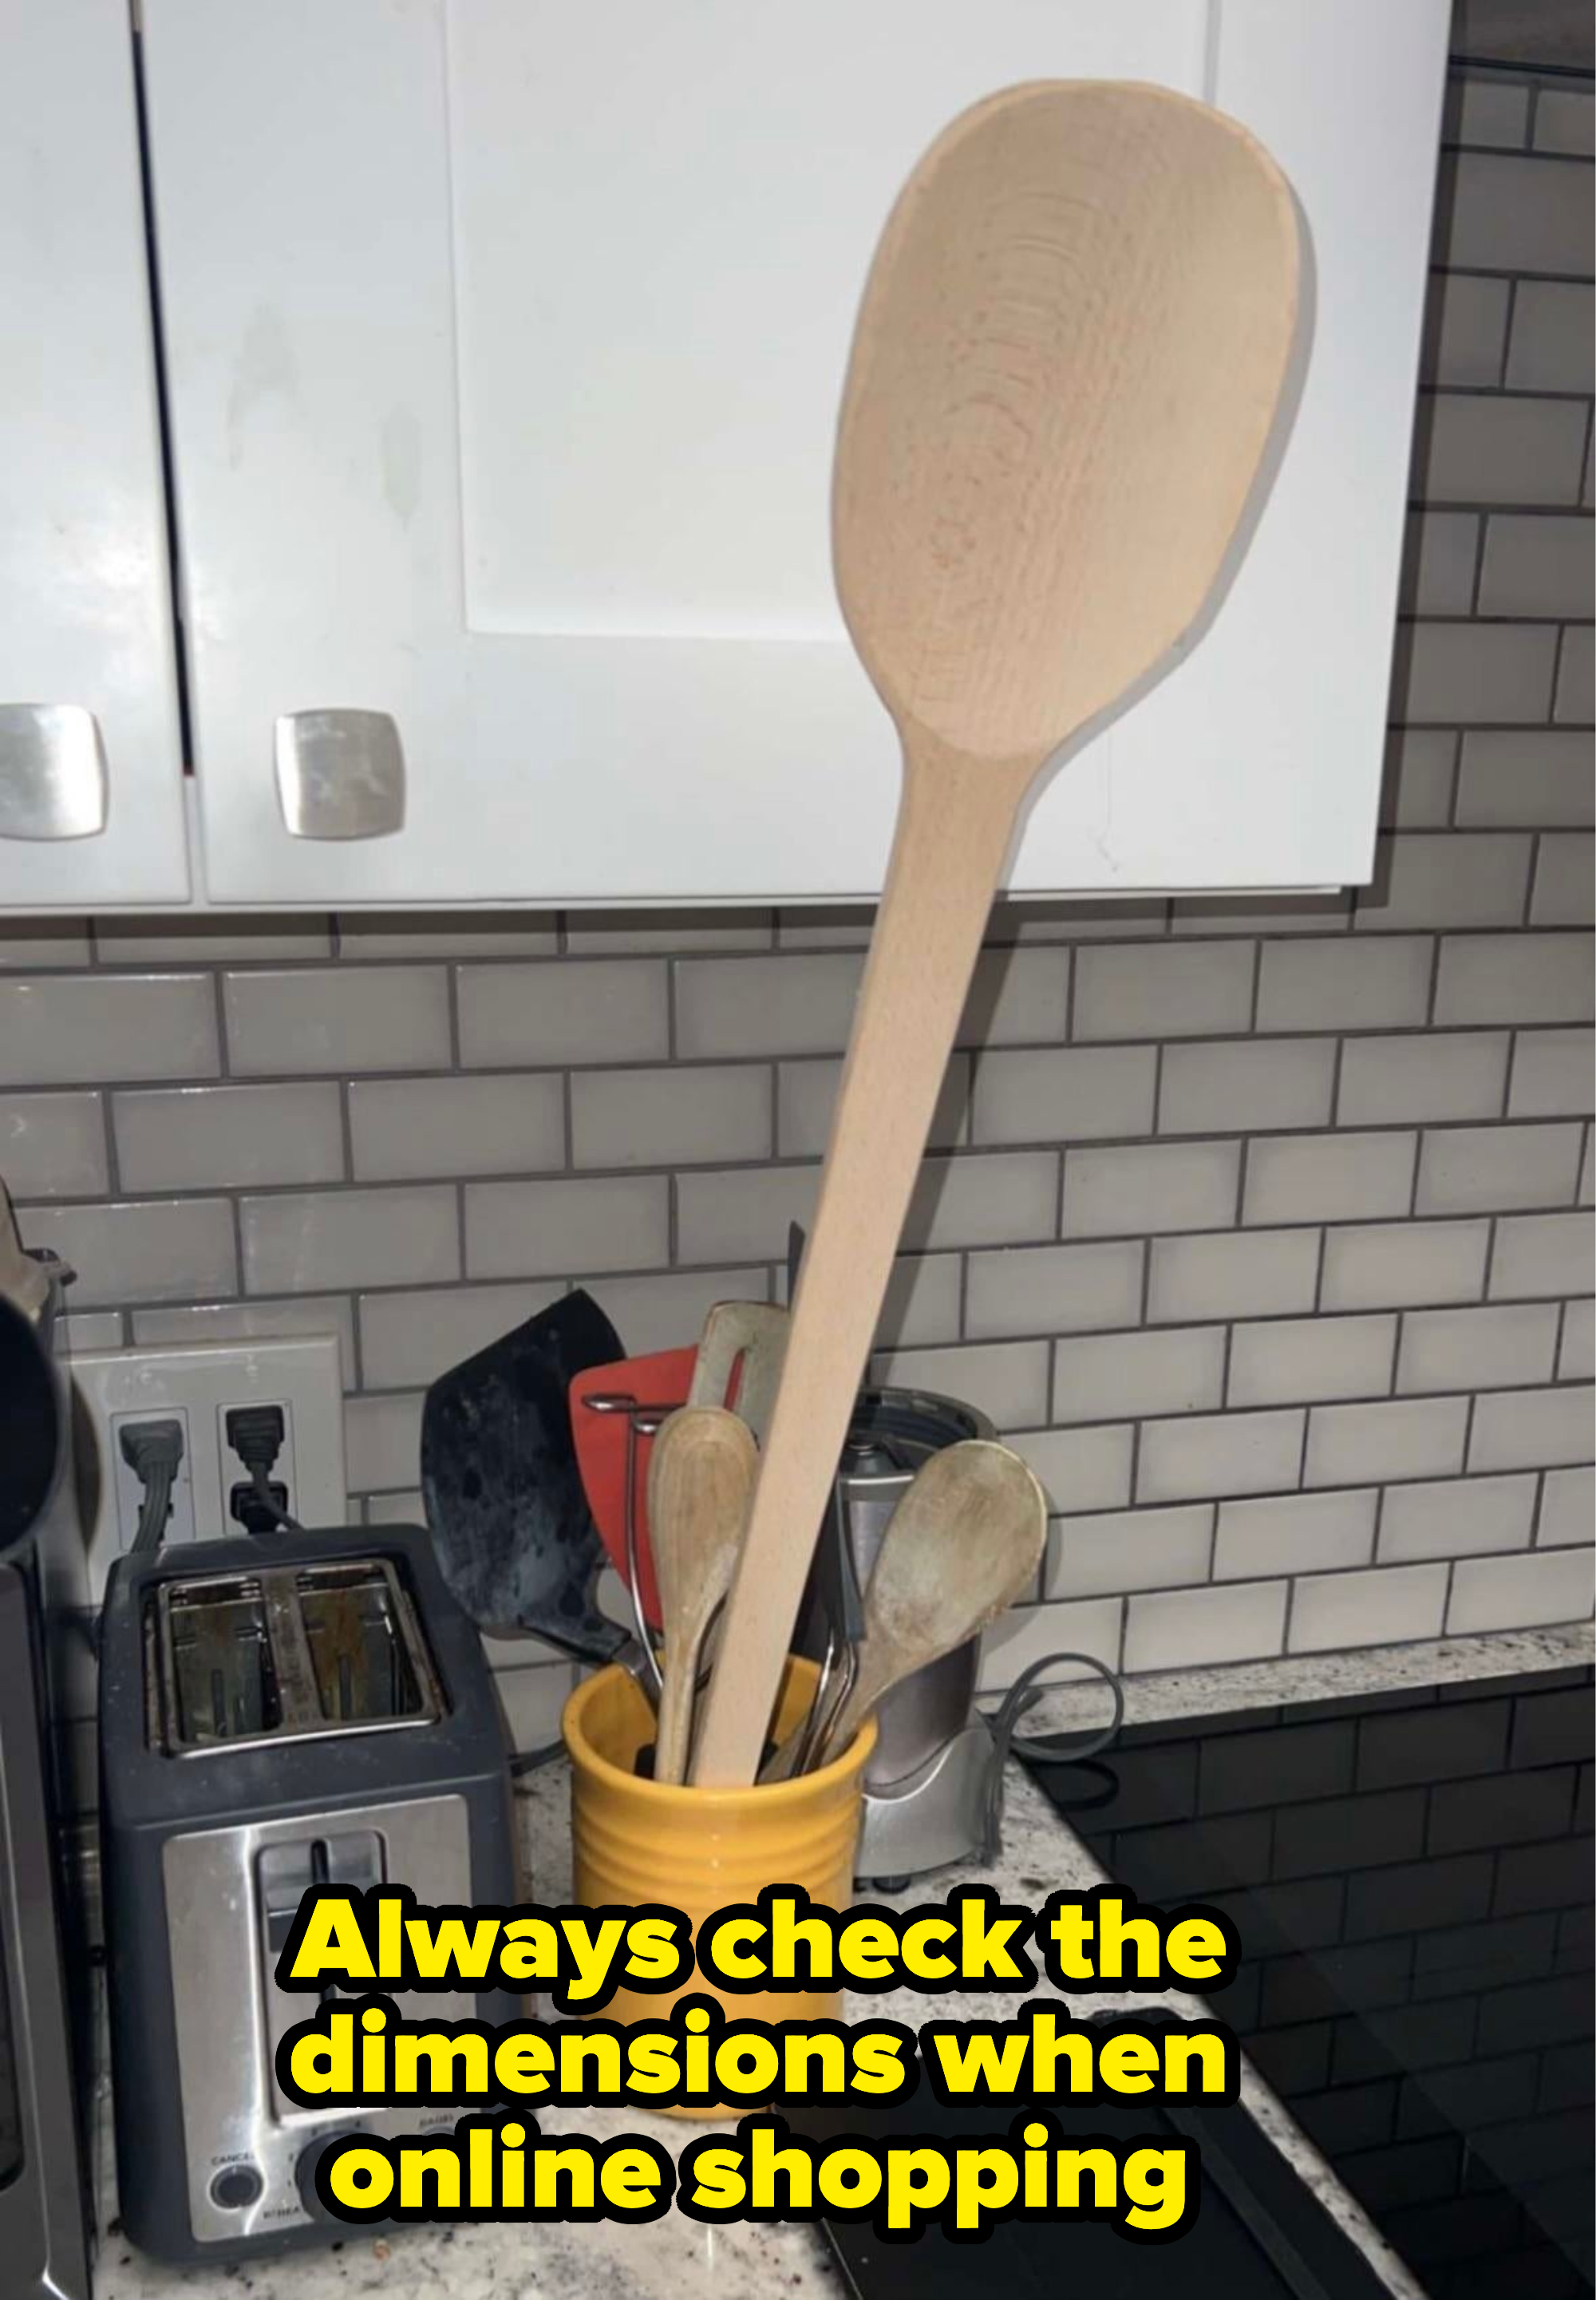 a ridiculously big wooden spoon